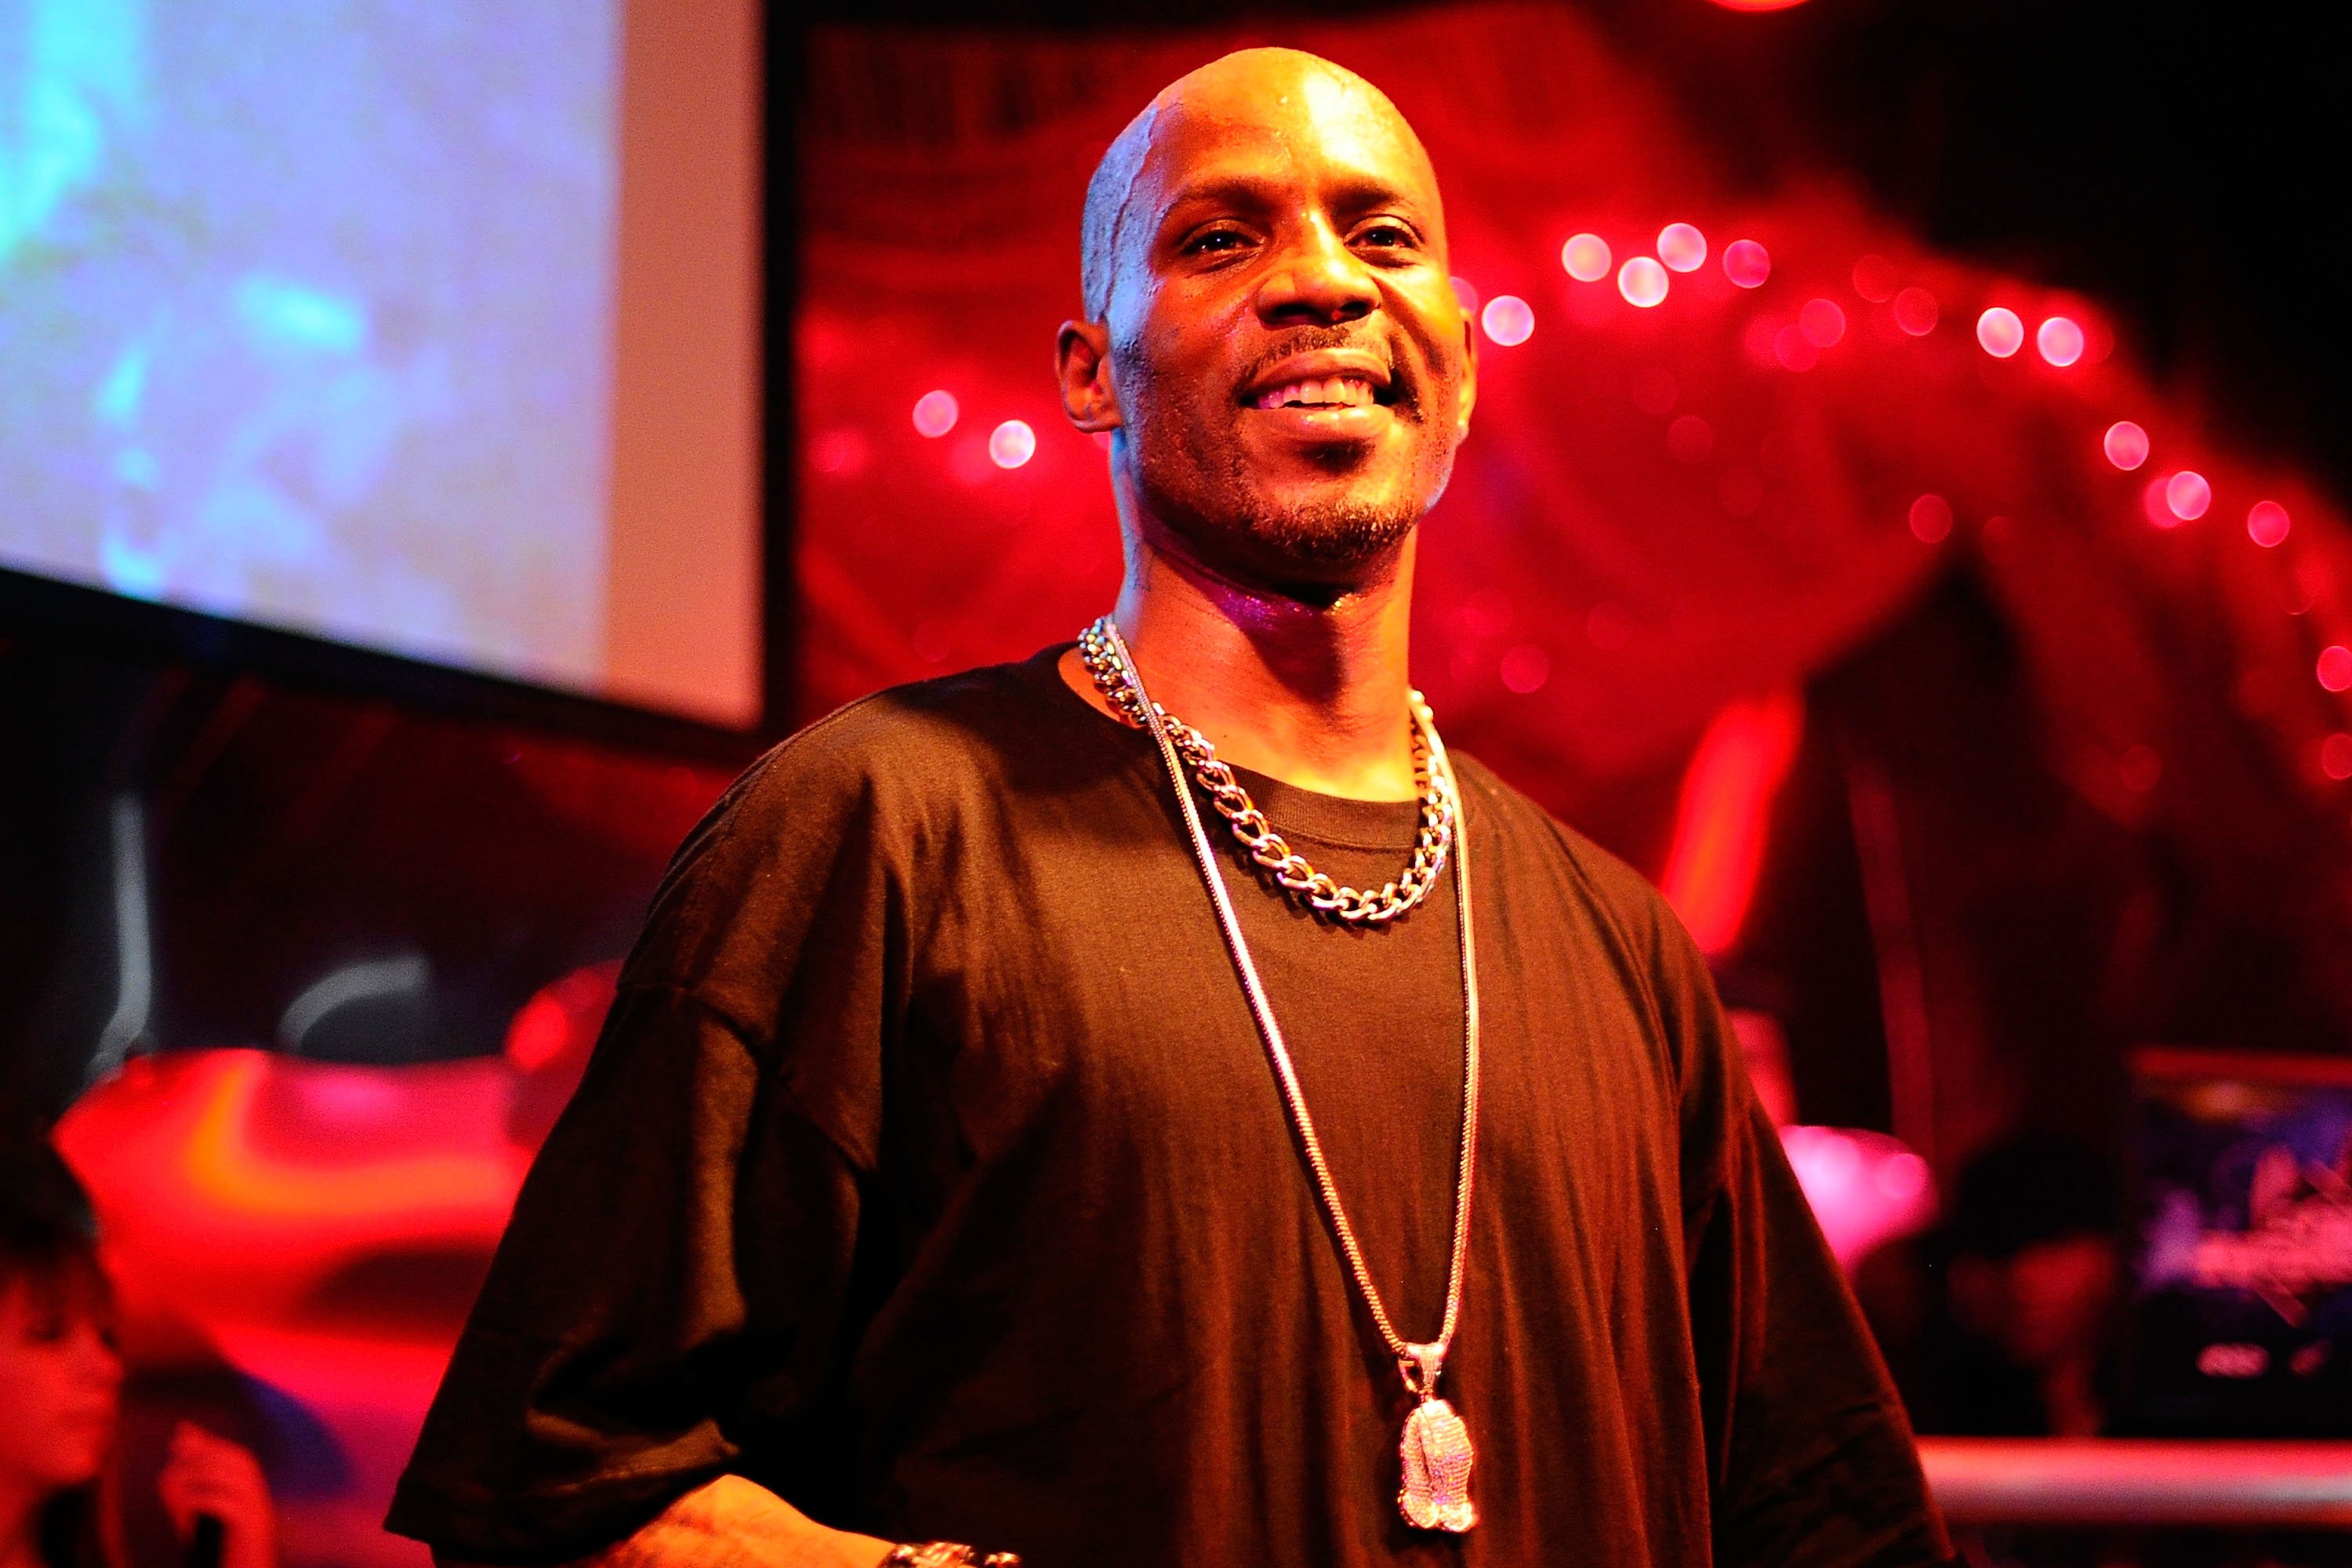 DMX smiling while wearing a black shirt and a chain at a concert.